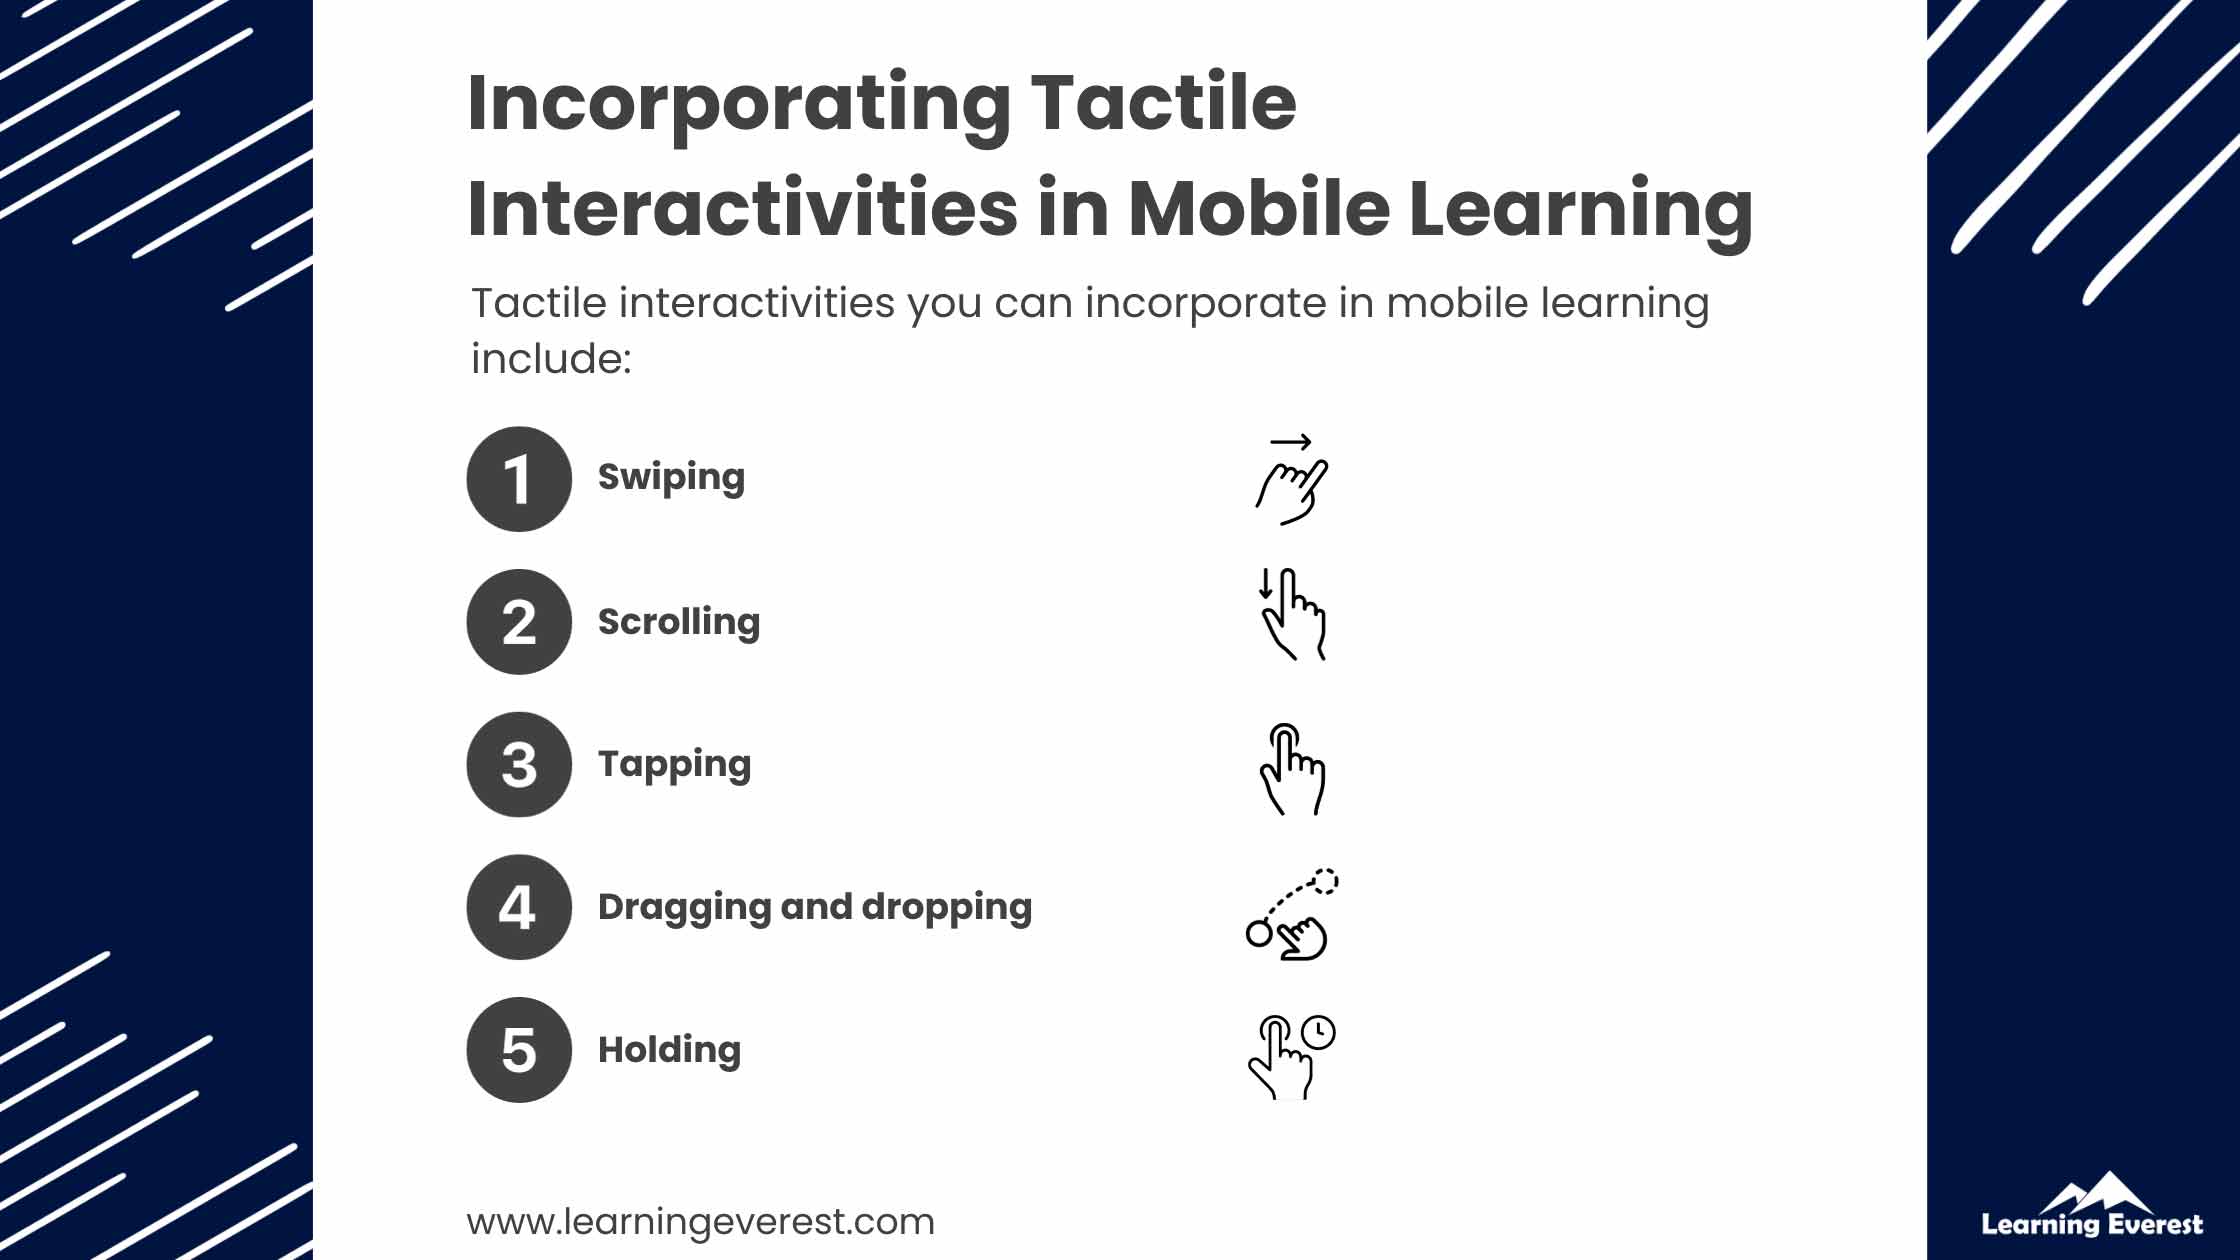 Incorporating Tactile Interactivities in Mobile Learning